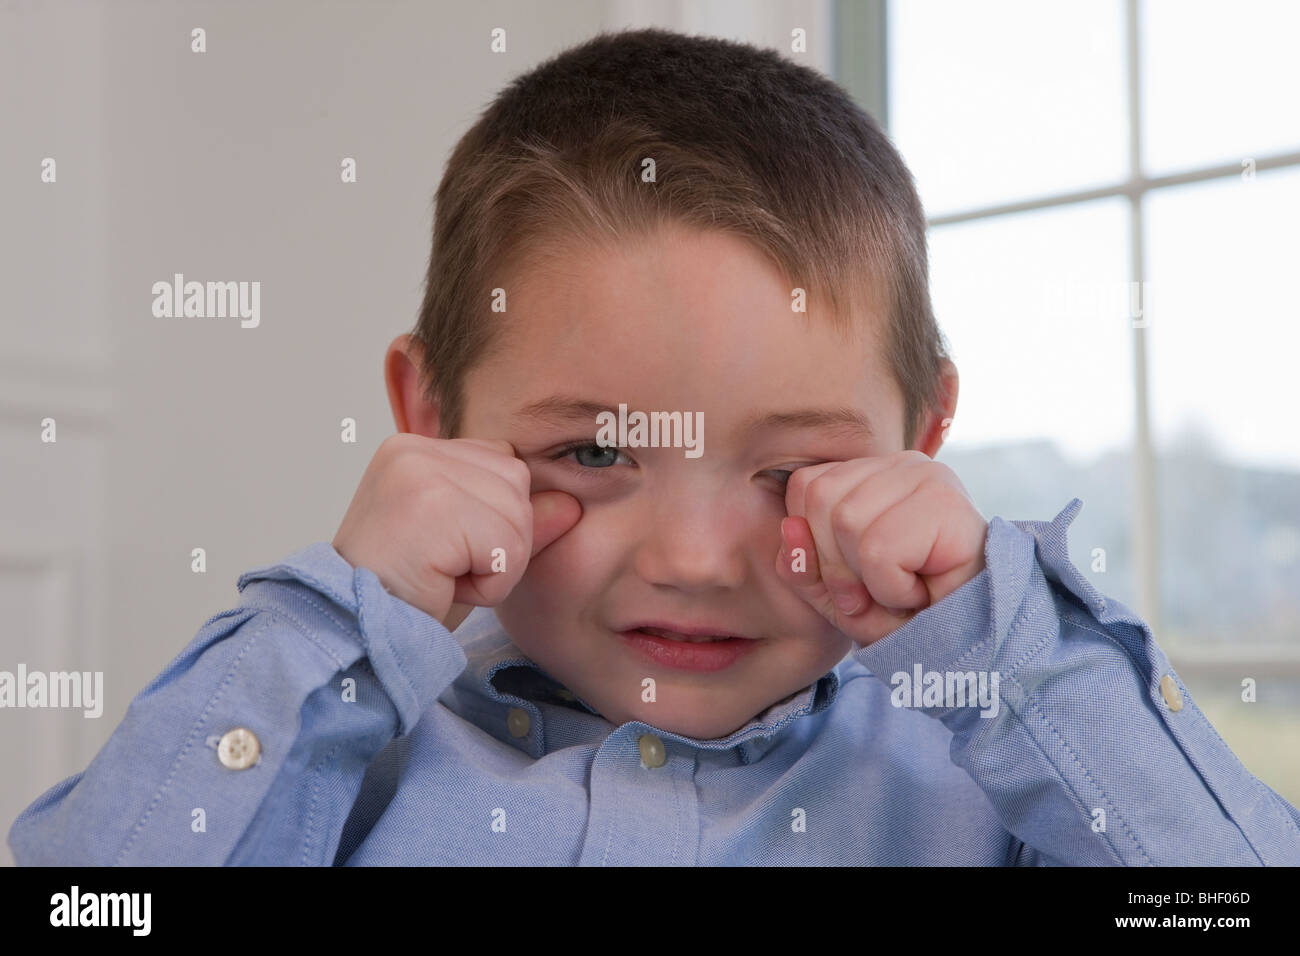 Boy signing the word 'Sleepy' in American Sign Language Stock Photo